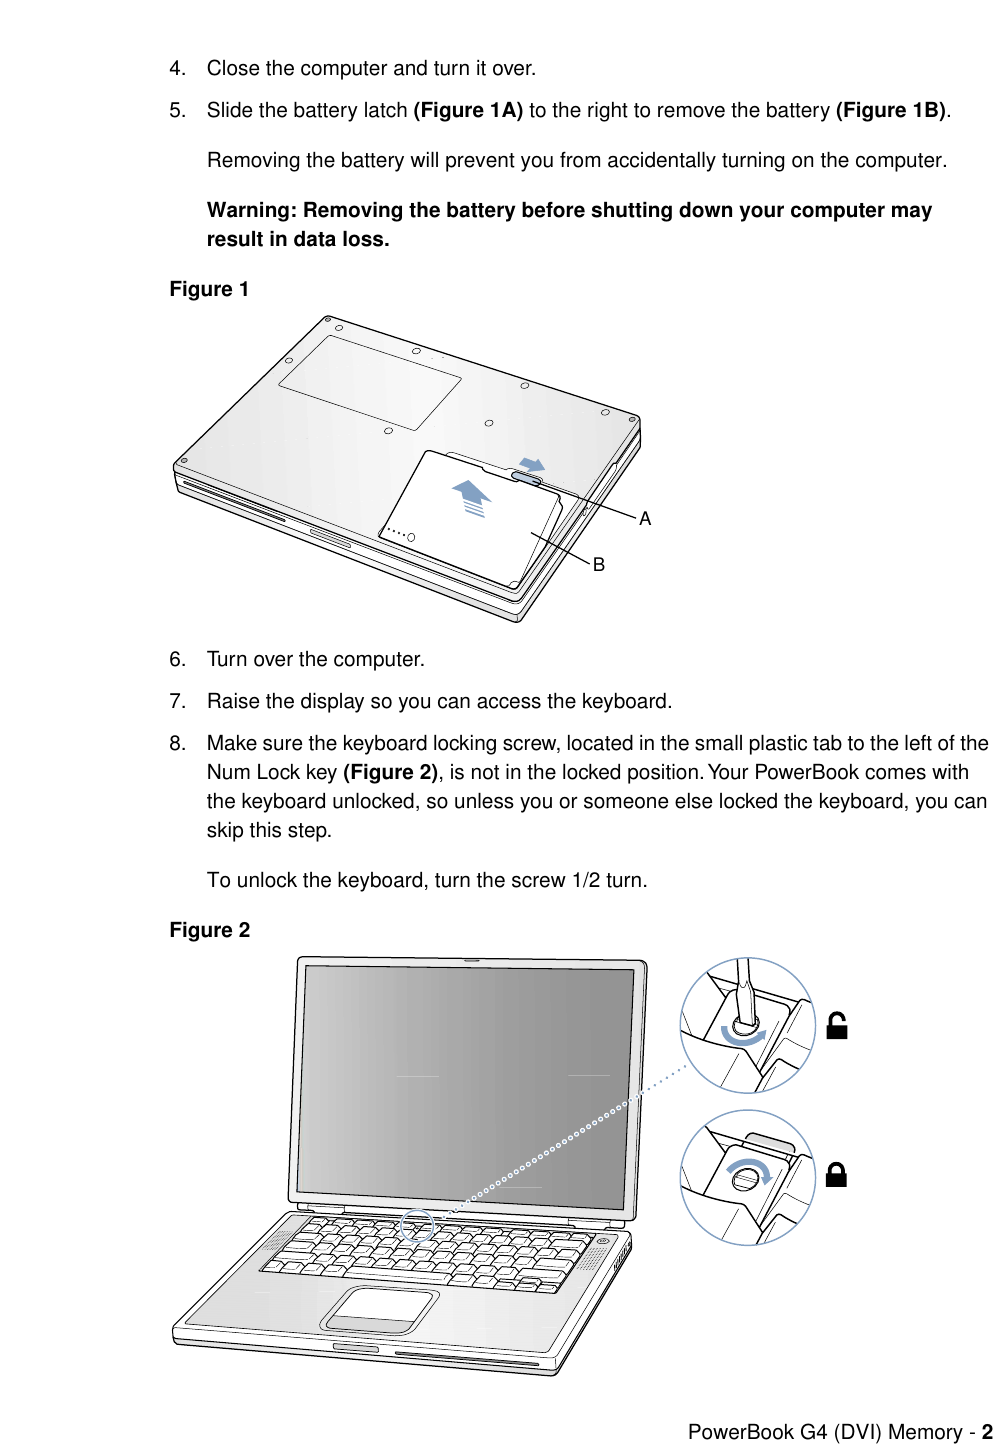 Page 2 of 7 - Apple PowerBook G4 (DVI) User Manual Power Book And (1GHz/867MHz) - Memory Card Replacement Instructions Pbg4dvi-mem-cip